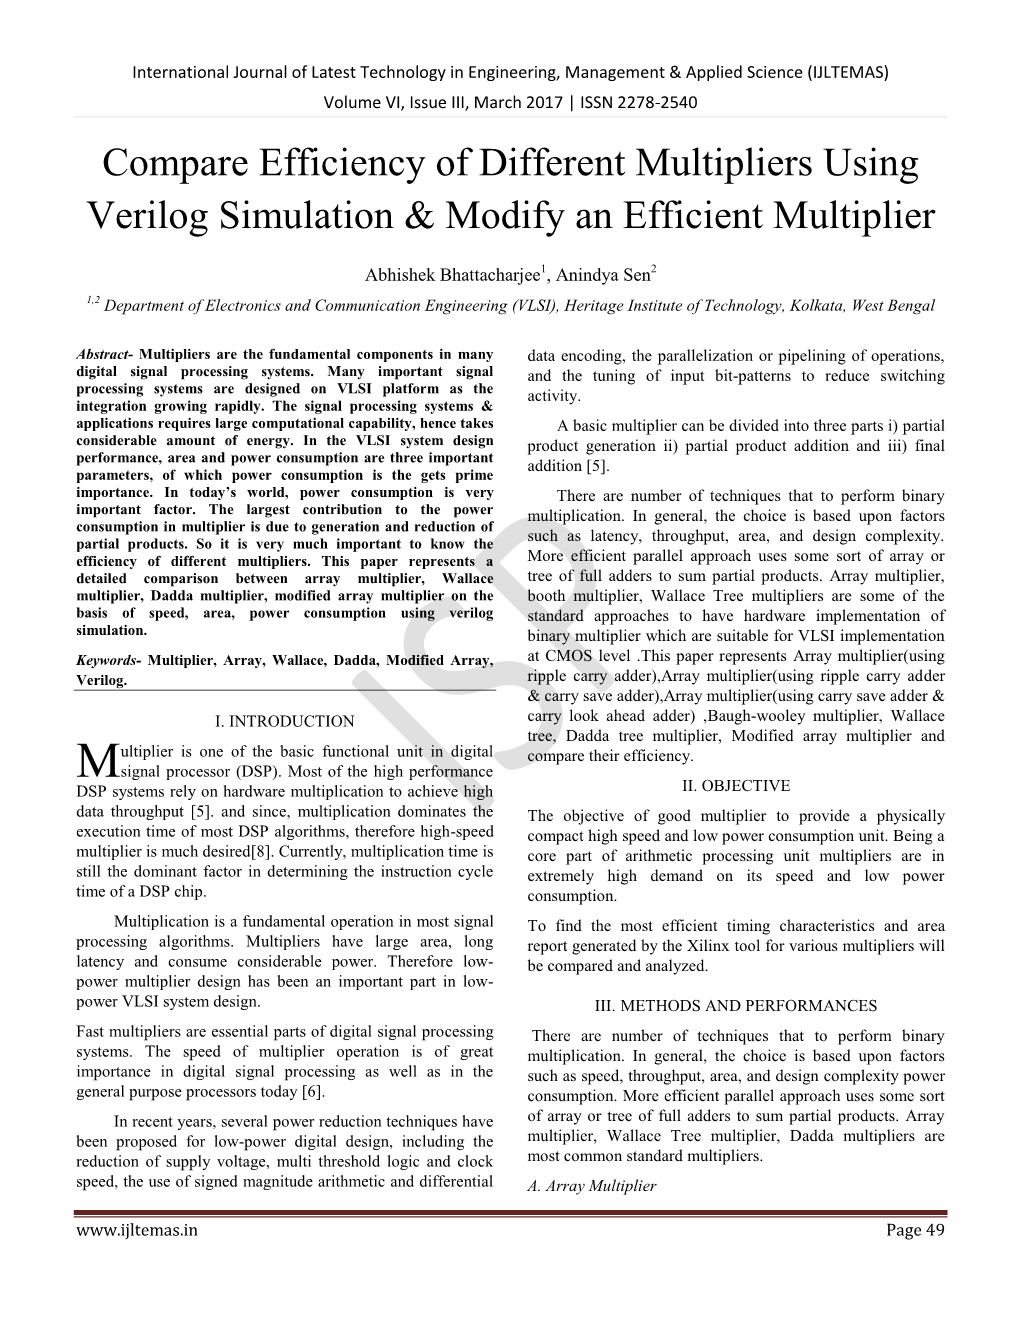 Compare Efficiency of Different Multipliers Using Verilog Simulation & Modify an Efficient Multiplier